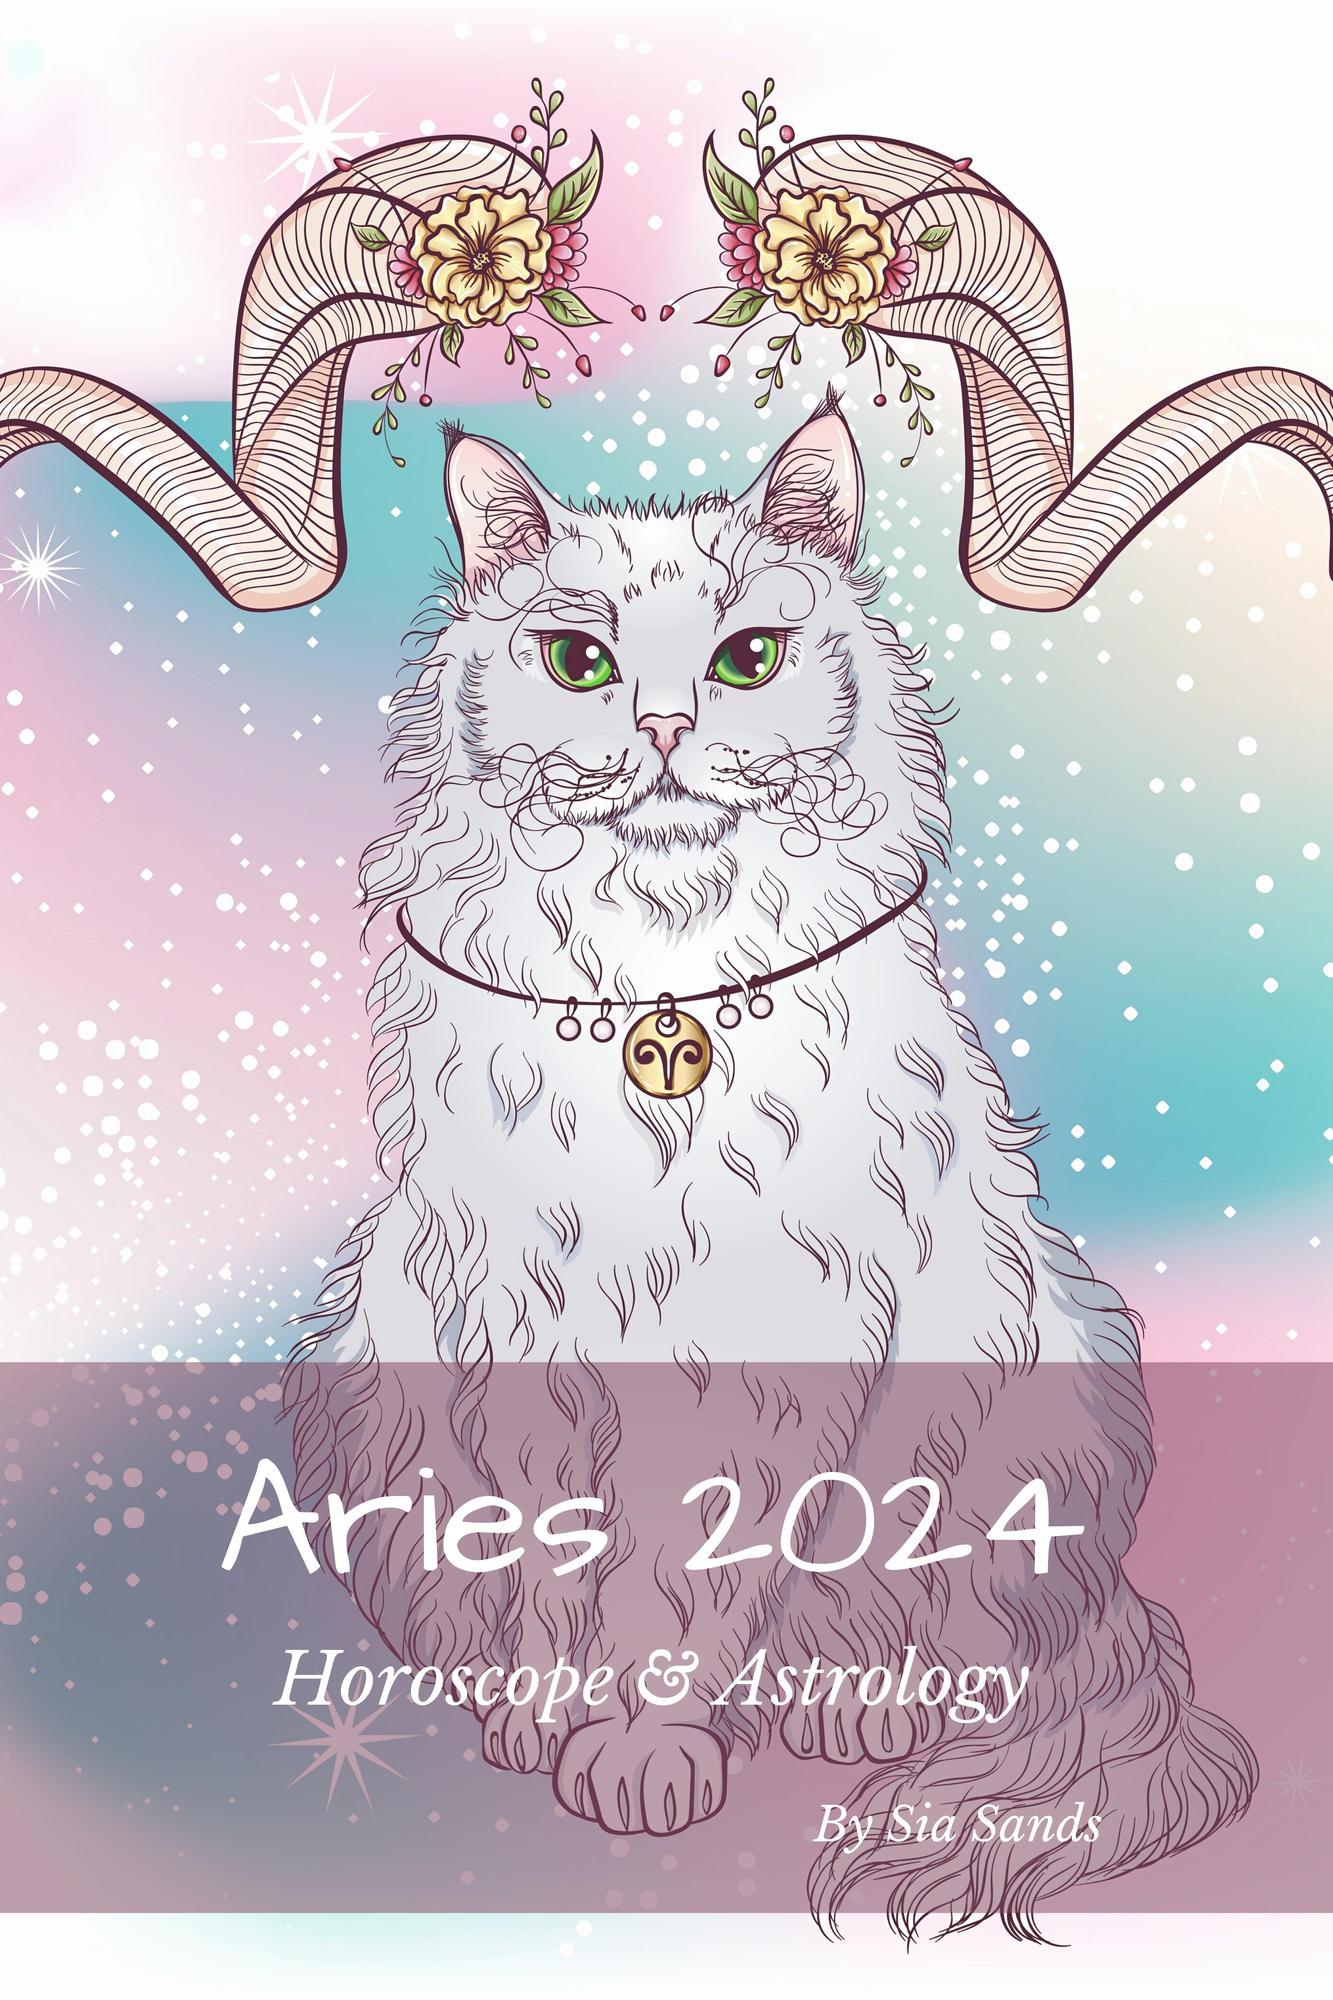 Smashwords Aries 2024 Horoscrope & Astrology a book by Sia Sands